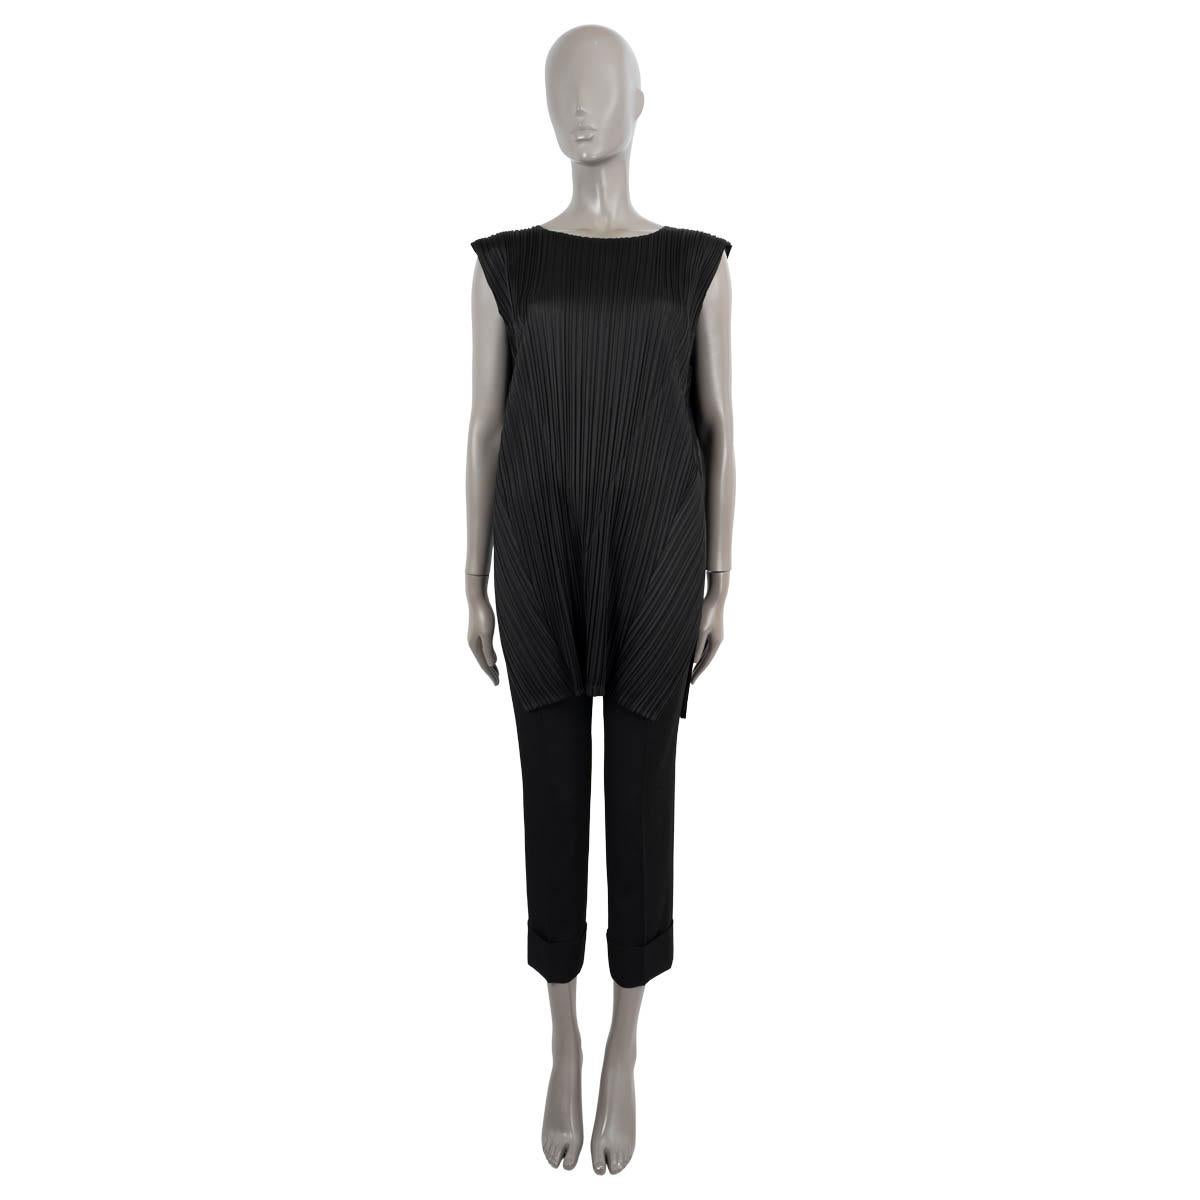 100% authentic Issey Miyake Pleats Please sleeveless shirt in black polyester (100%). Unlined with slits on the side. Has been worn and is in excellent condition. 

Measurements
Model	PP78-T714
Tag Size	4
Size	L
Shoulder Width	39cm